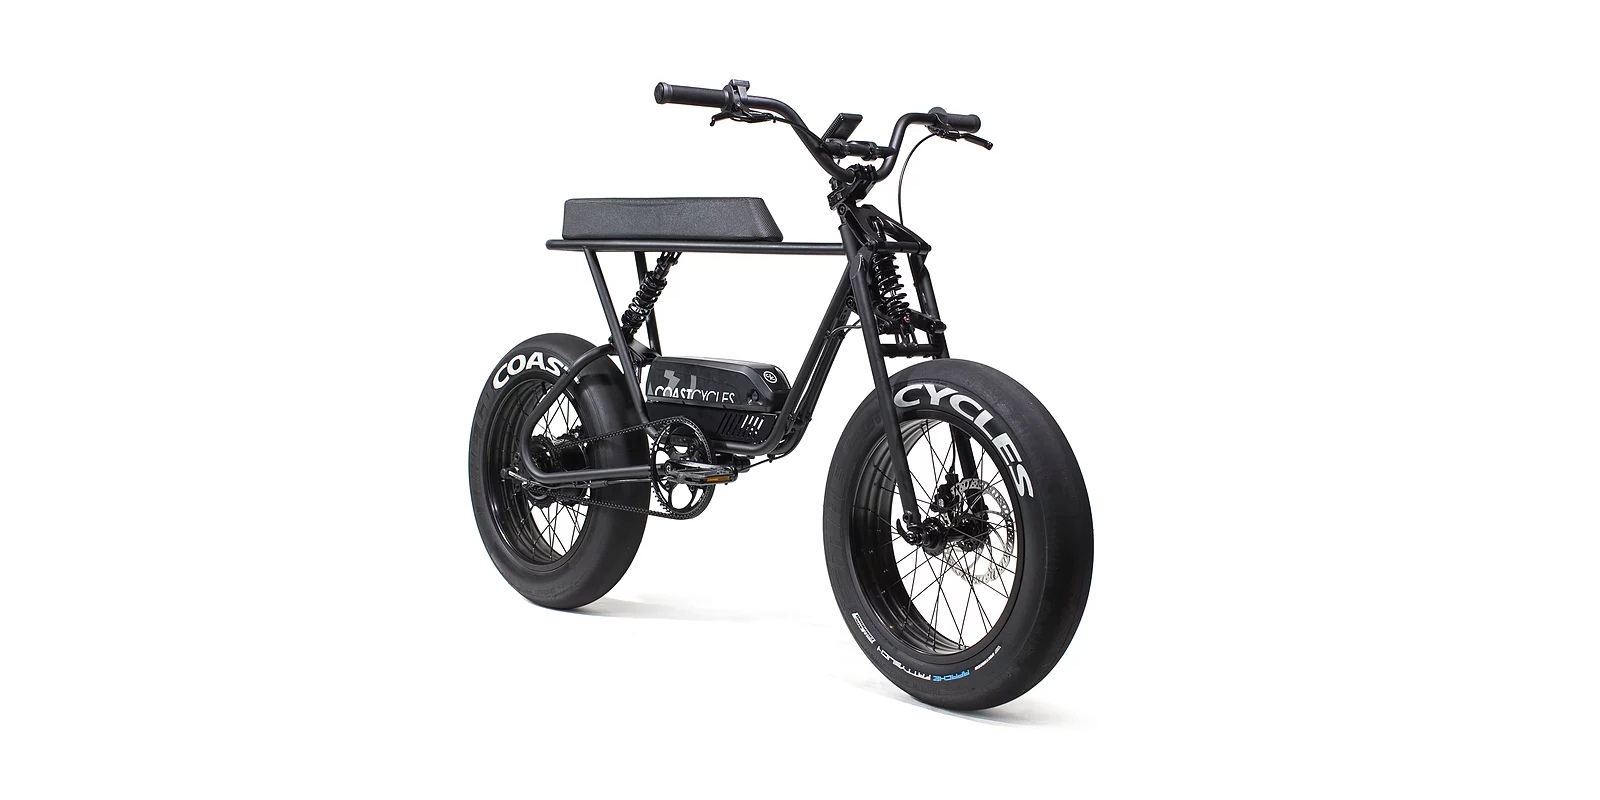 photo of Buzzraw X full suspension electric minibikes unveiled by Coast Cycles image